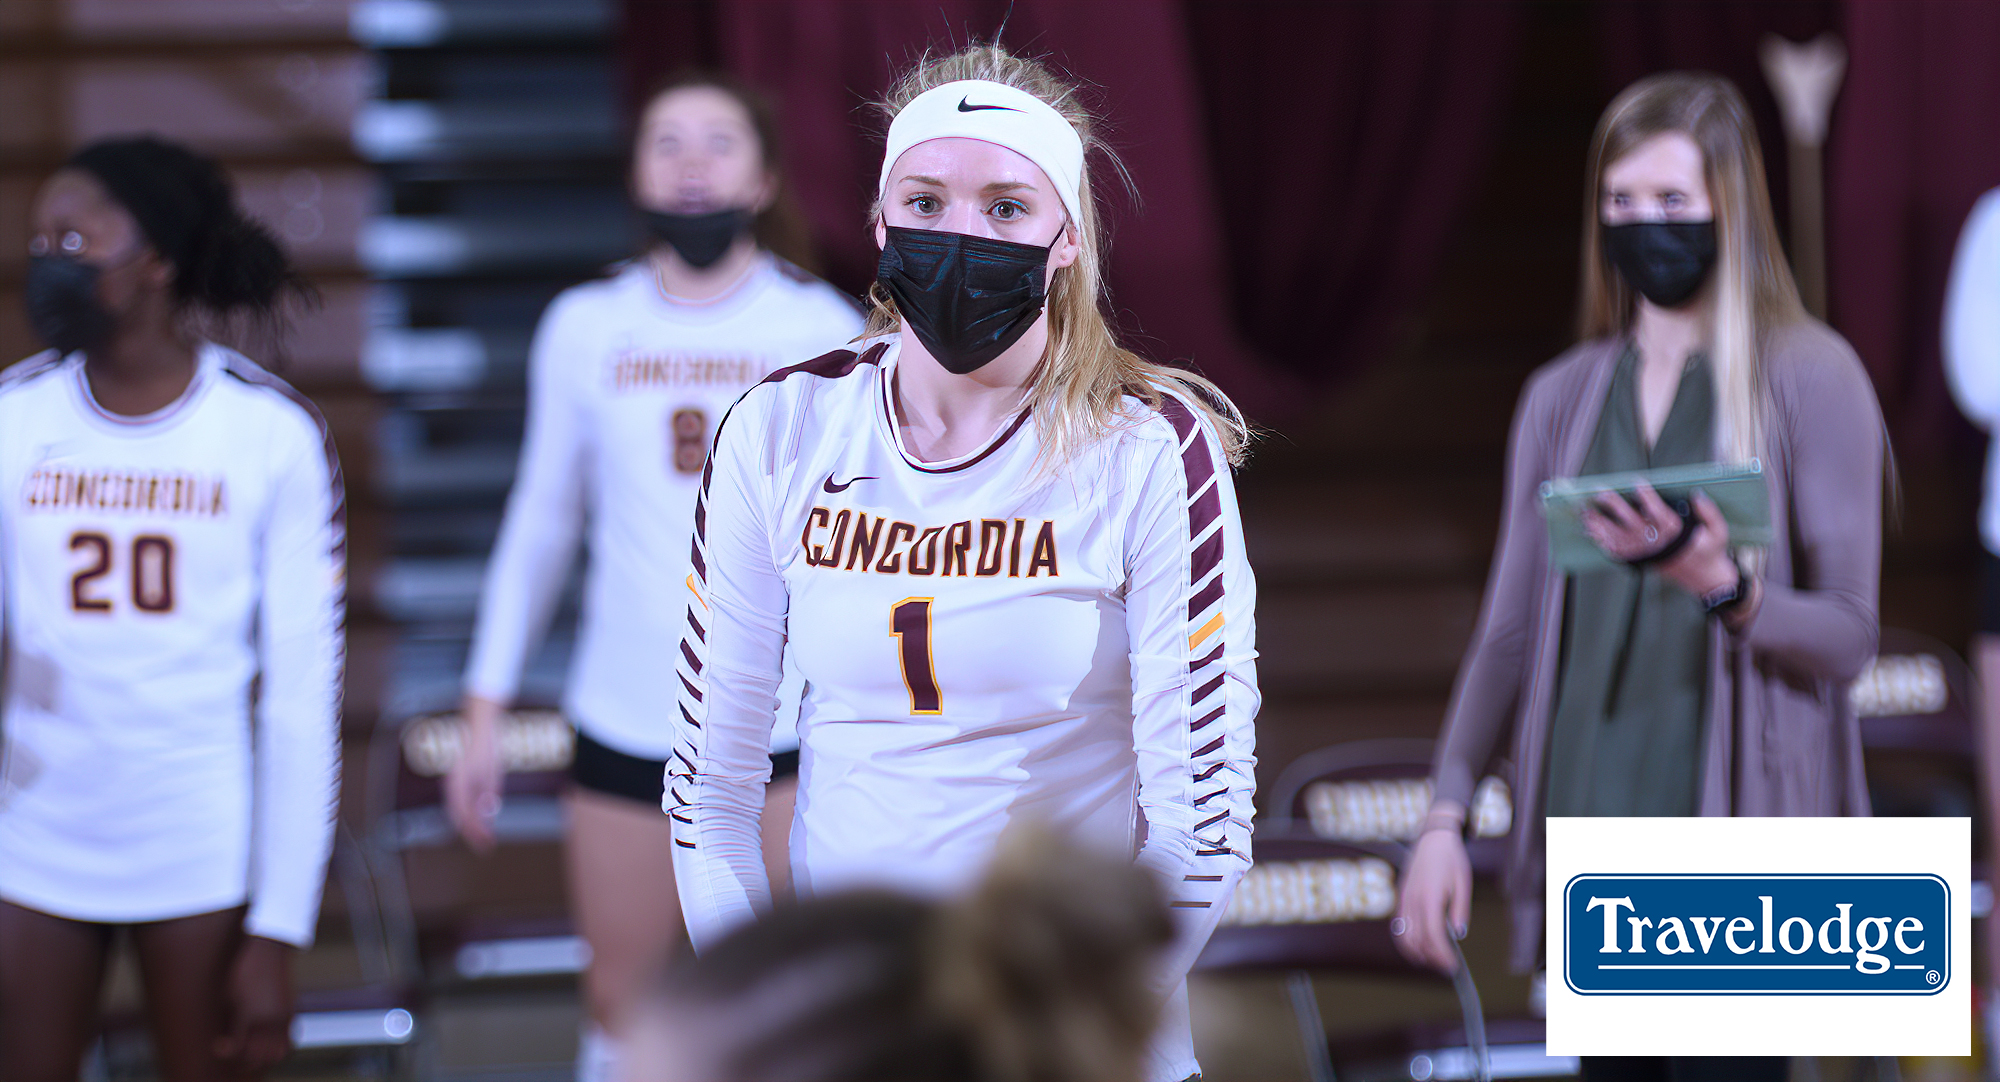 Senior Bailey Gronner had a team-high 15 kills and hit .500 in the Cobbers' match against Gustavus.